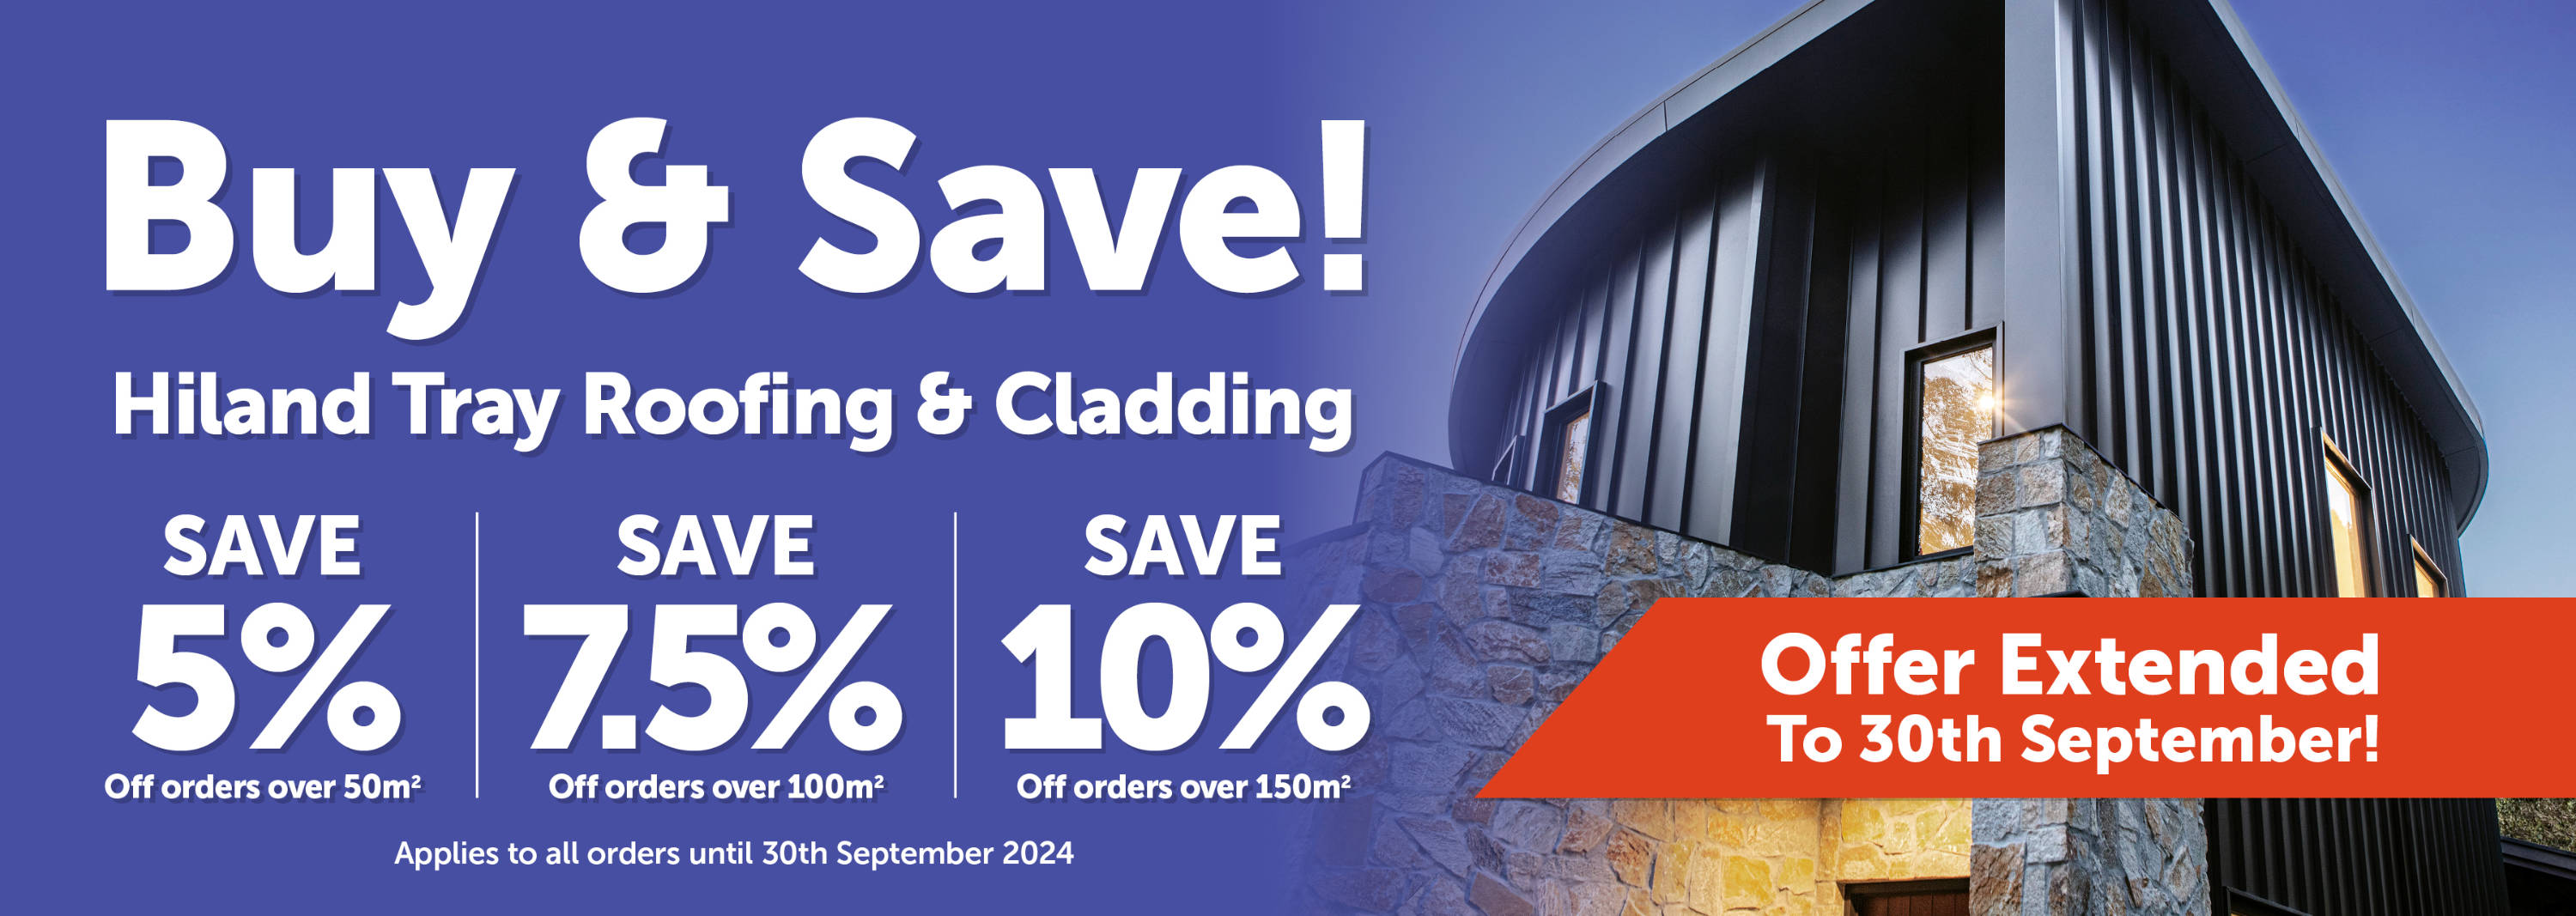 Buy & Save! Hiland Tray Roofing & Cladding. Save 5% off orders over 50m². Save 7.5% off orders over 100m². Save 10% off orders over 150m². Applies to all orders until 30 September 2024.